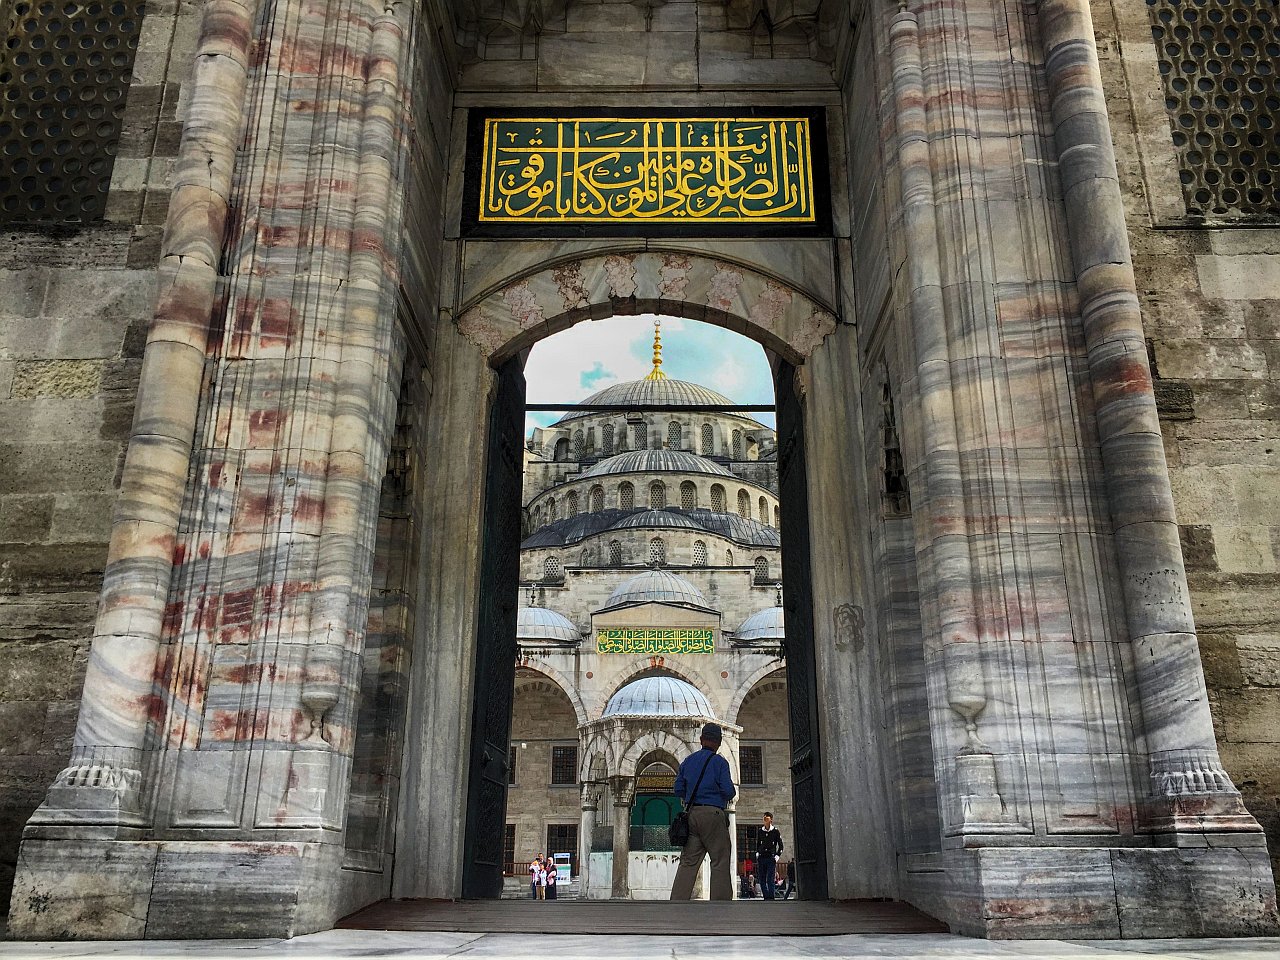 Istanbul -Sultan Ahmed Mosque (Blaue Moschee)